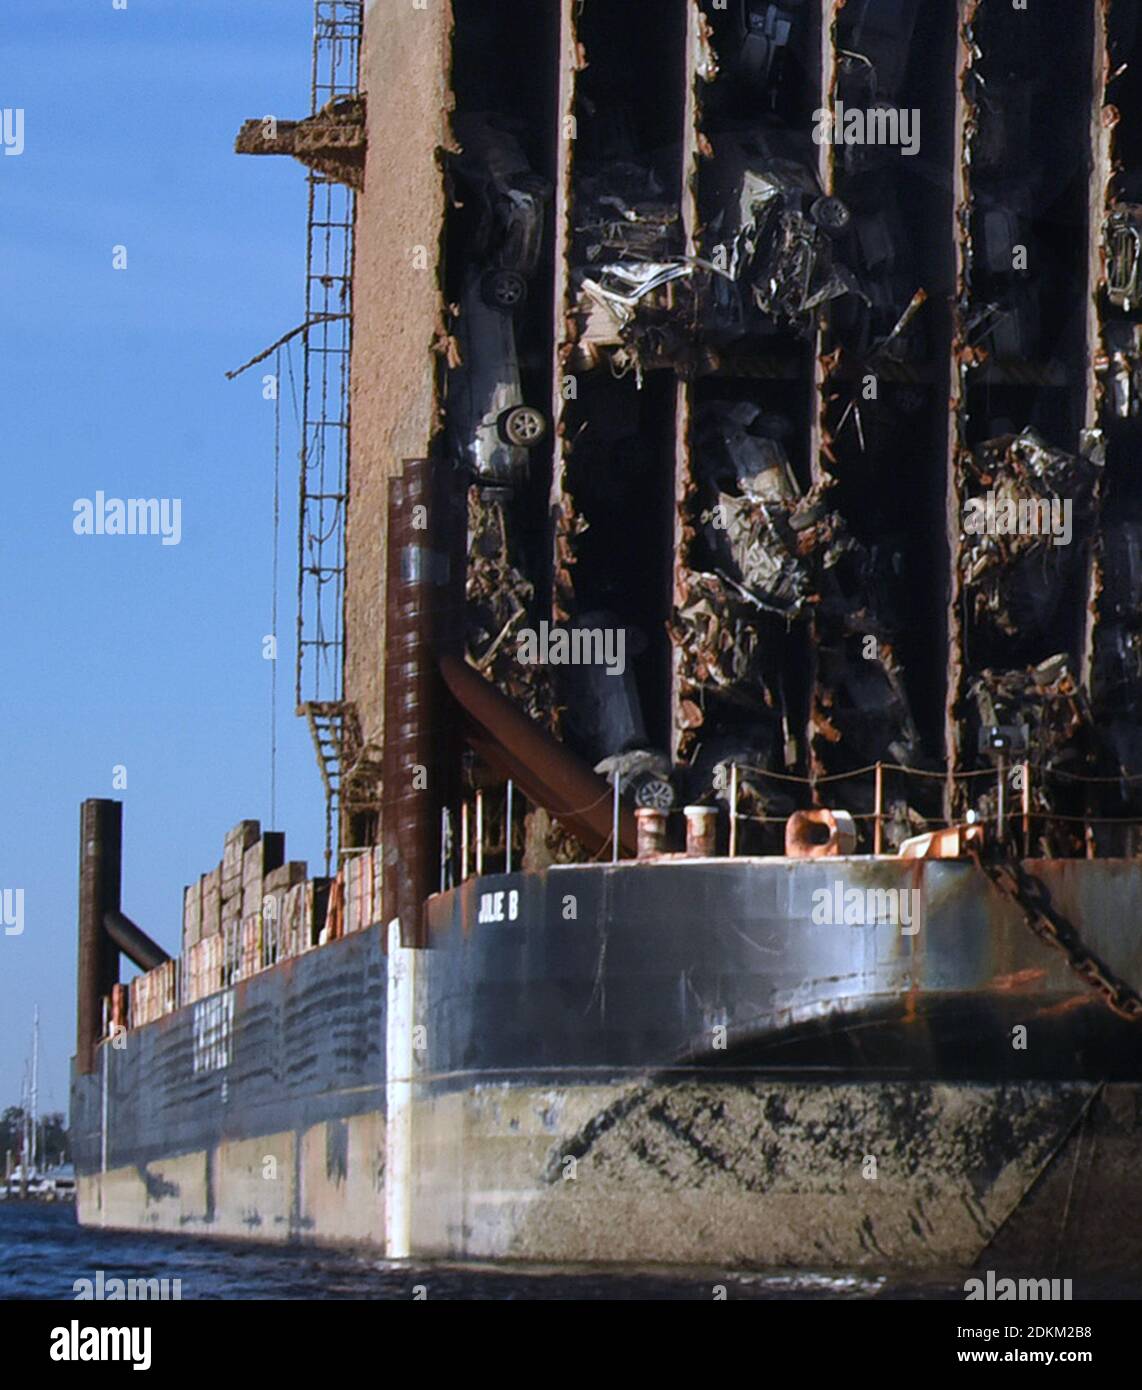 Georgia, USA. 14th Dec, 2020. December 14, 2020 - Brunswick, Georgia, United States - Cars are seen in the bow section of the Golden Ray cargo ship as it sits on a barge on December 14, 2020 in Brunswick, Georgia. A salvage company is cutting the vessel into eight segments, each of which will be removed by a barge and scrapped. The vehicle carrier, loaded with 4200 new cars, capsized in St. Simons Island Sound on September 8, 2019 as it was leaving the Port of Brunswick, Georgia. (Paul Hennessy/Alamy) Credit: Paul Hennessy/Alamy Live News Stock Photo